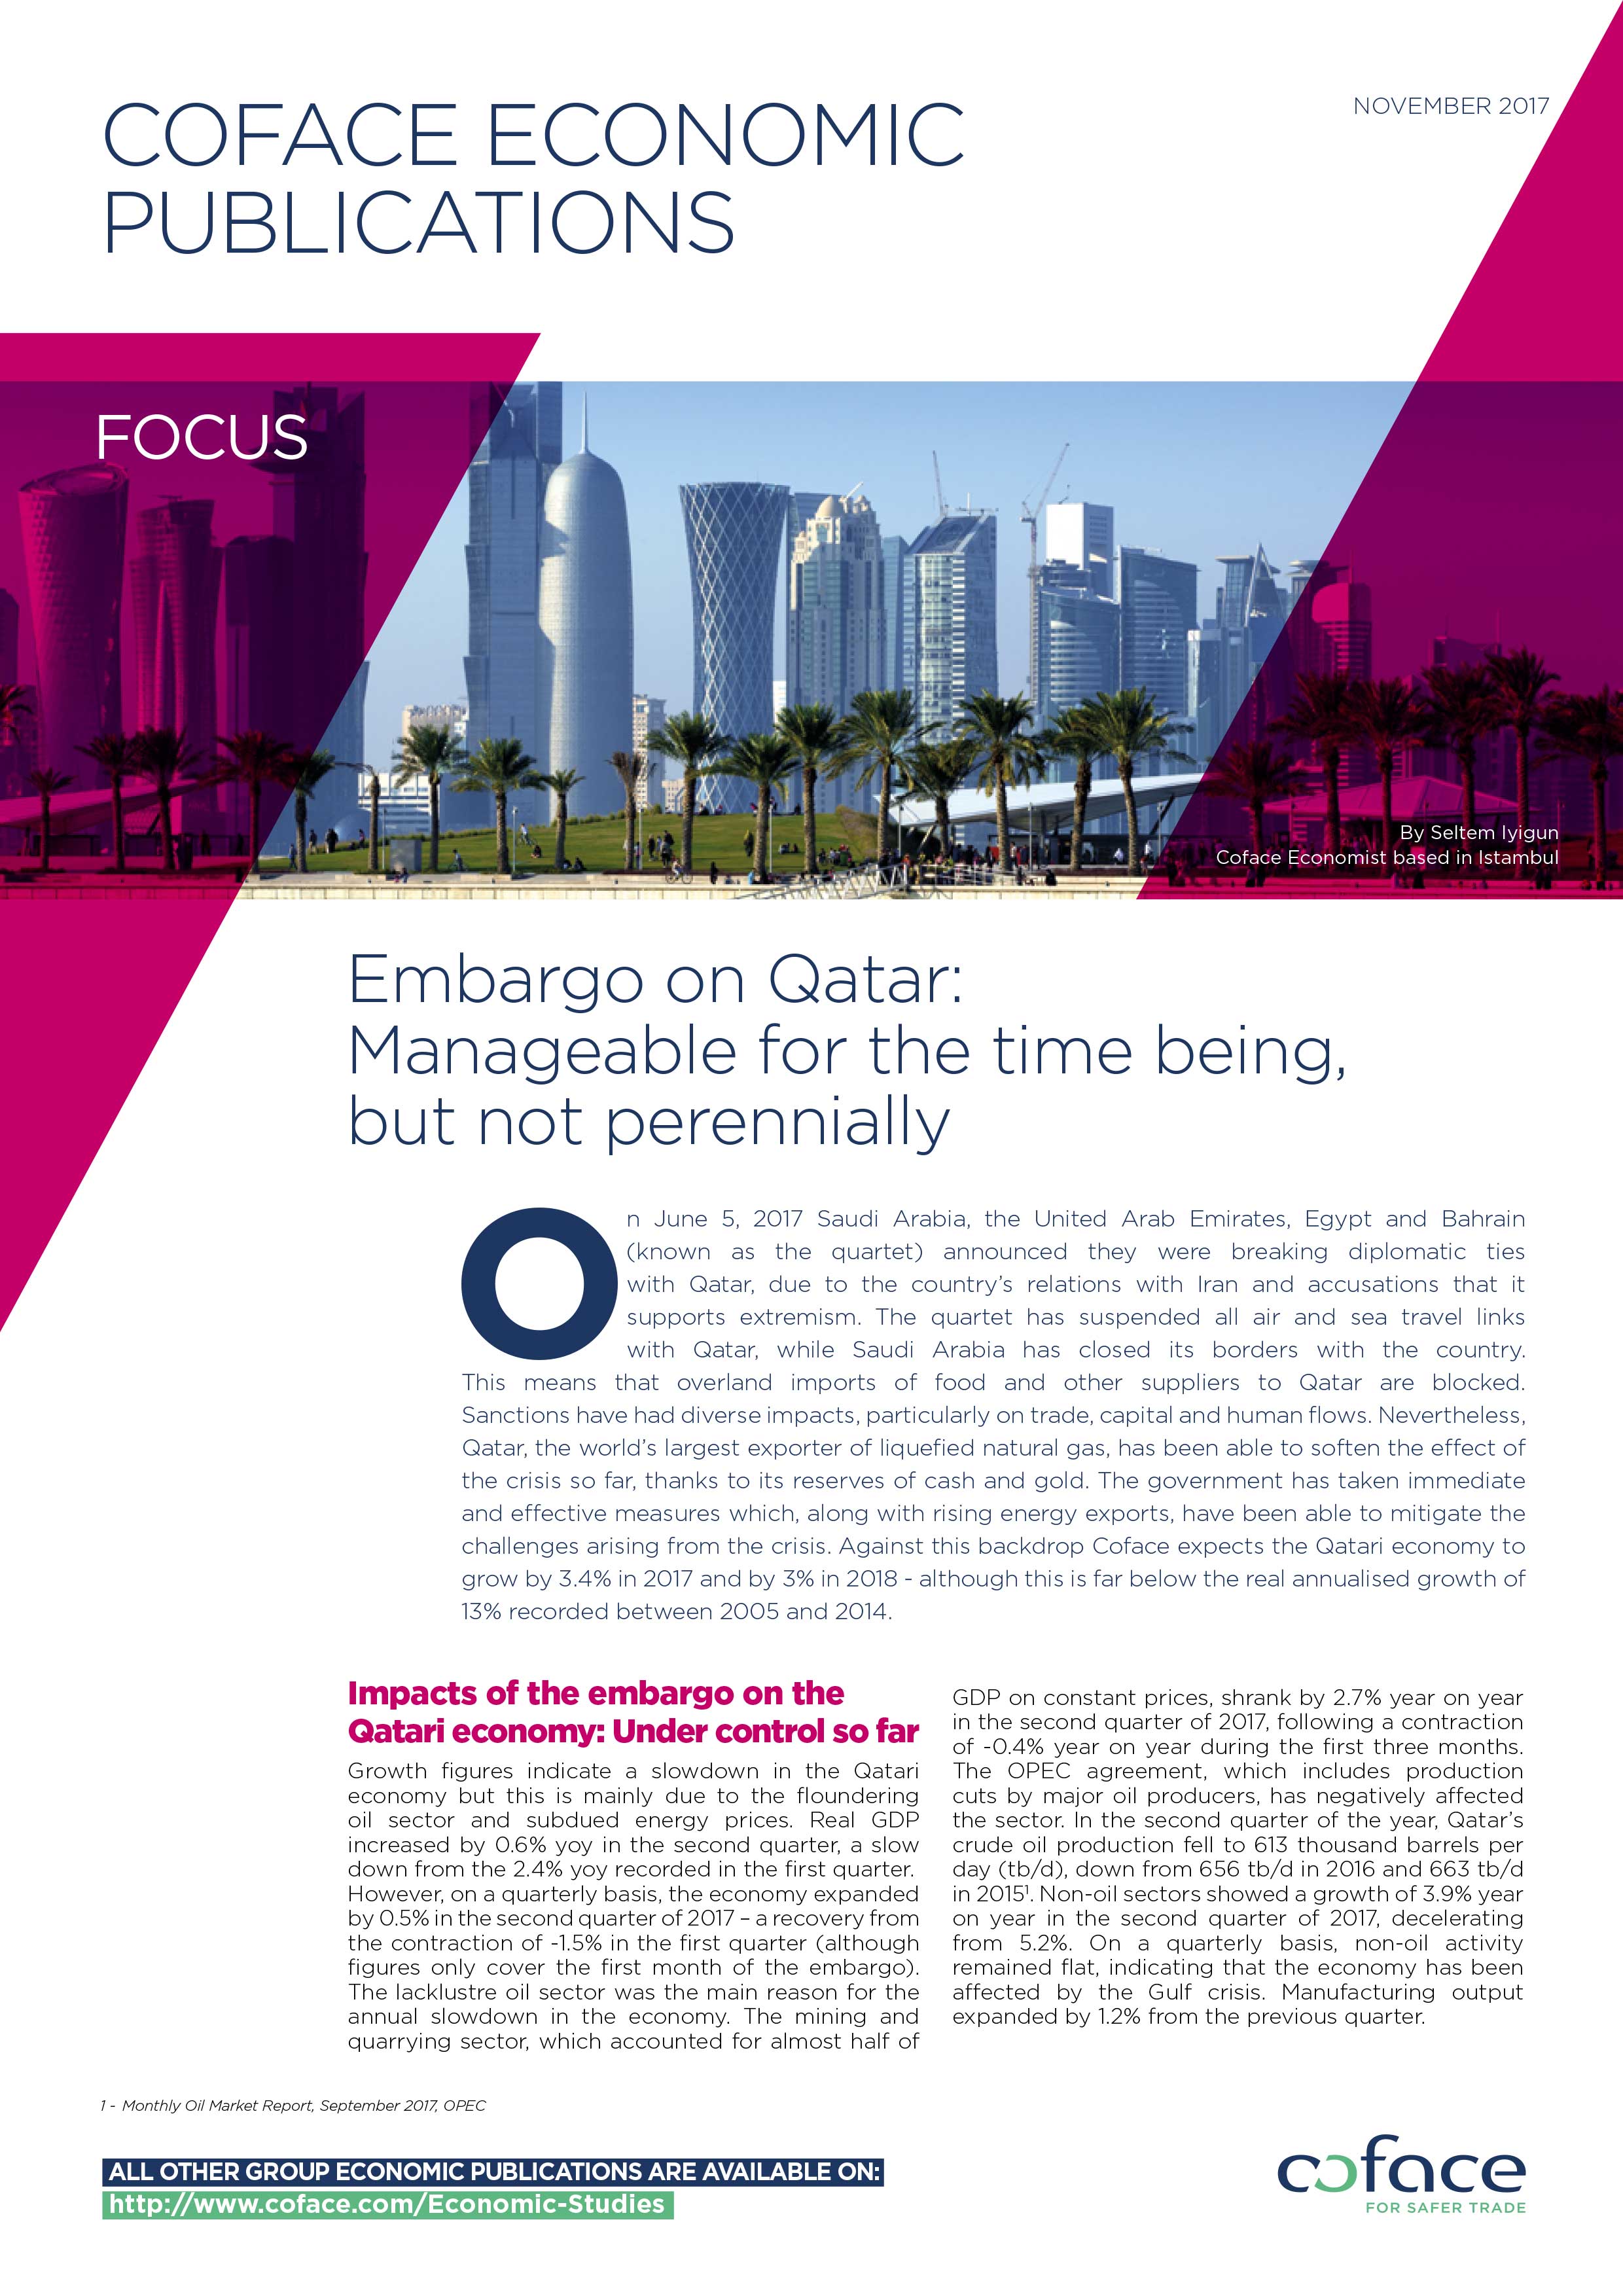 Embargo on Qatar: Manageable for the time being, but not perennially